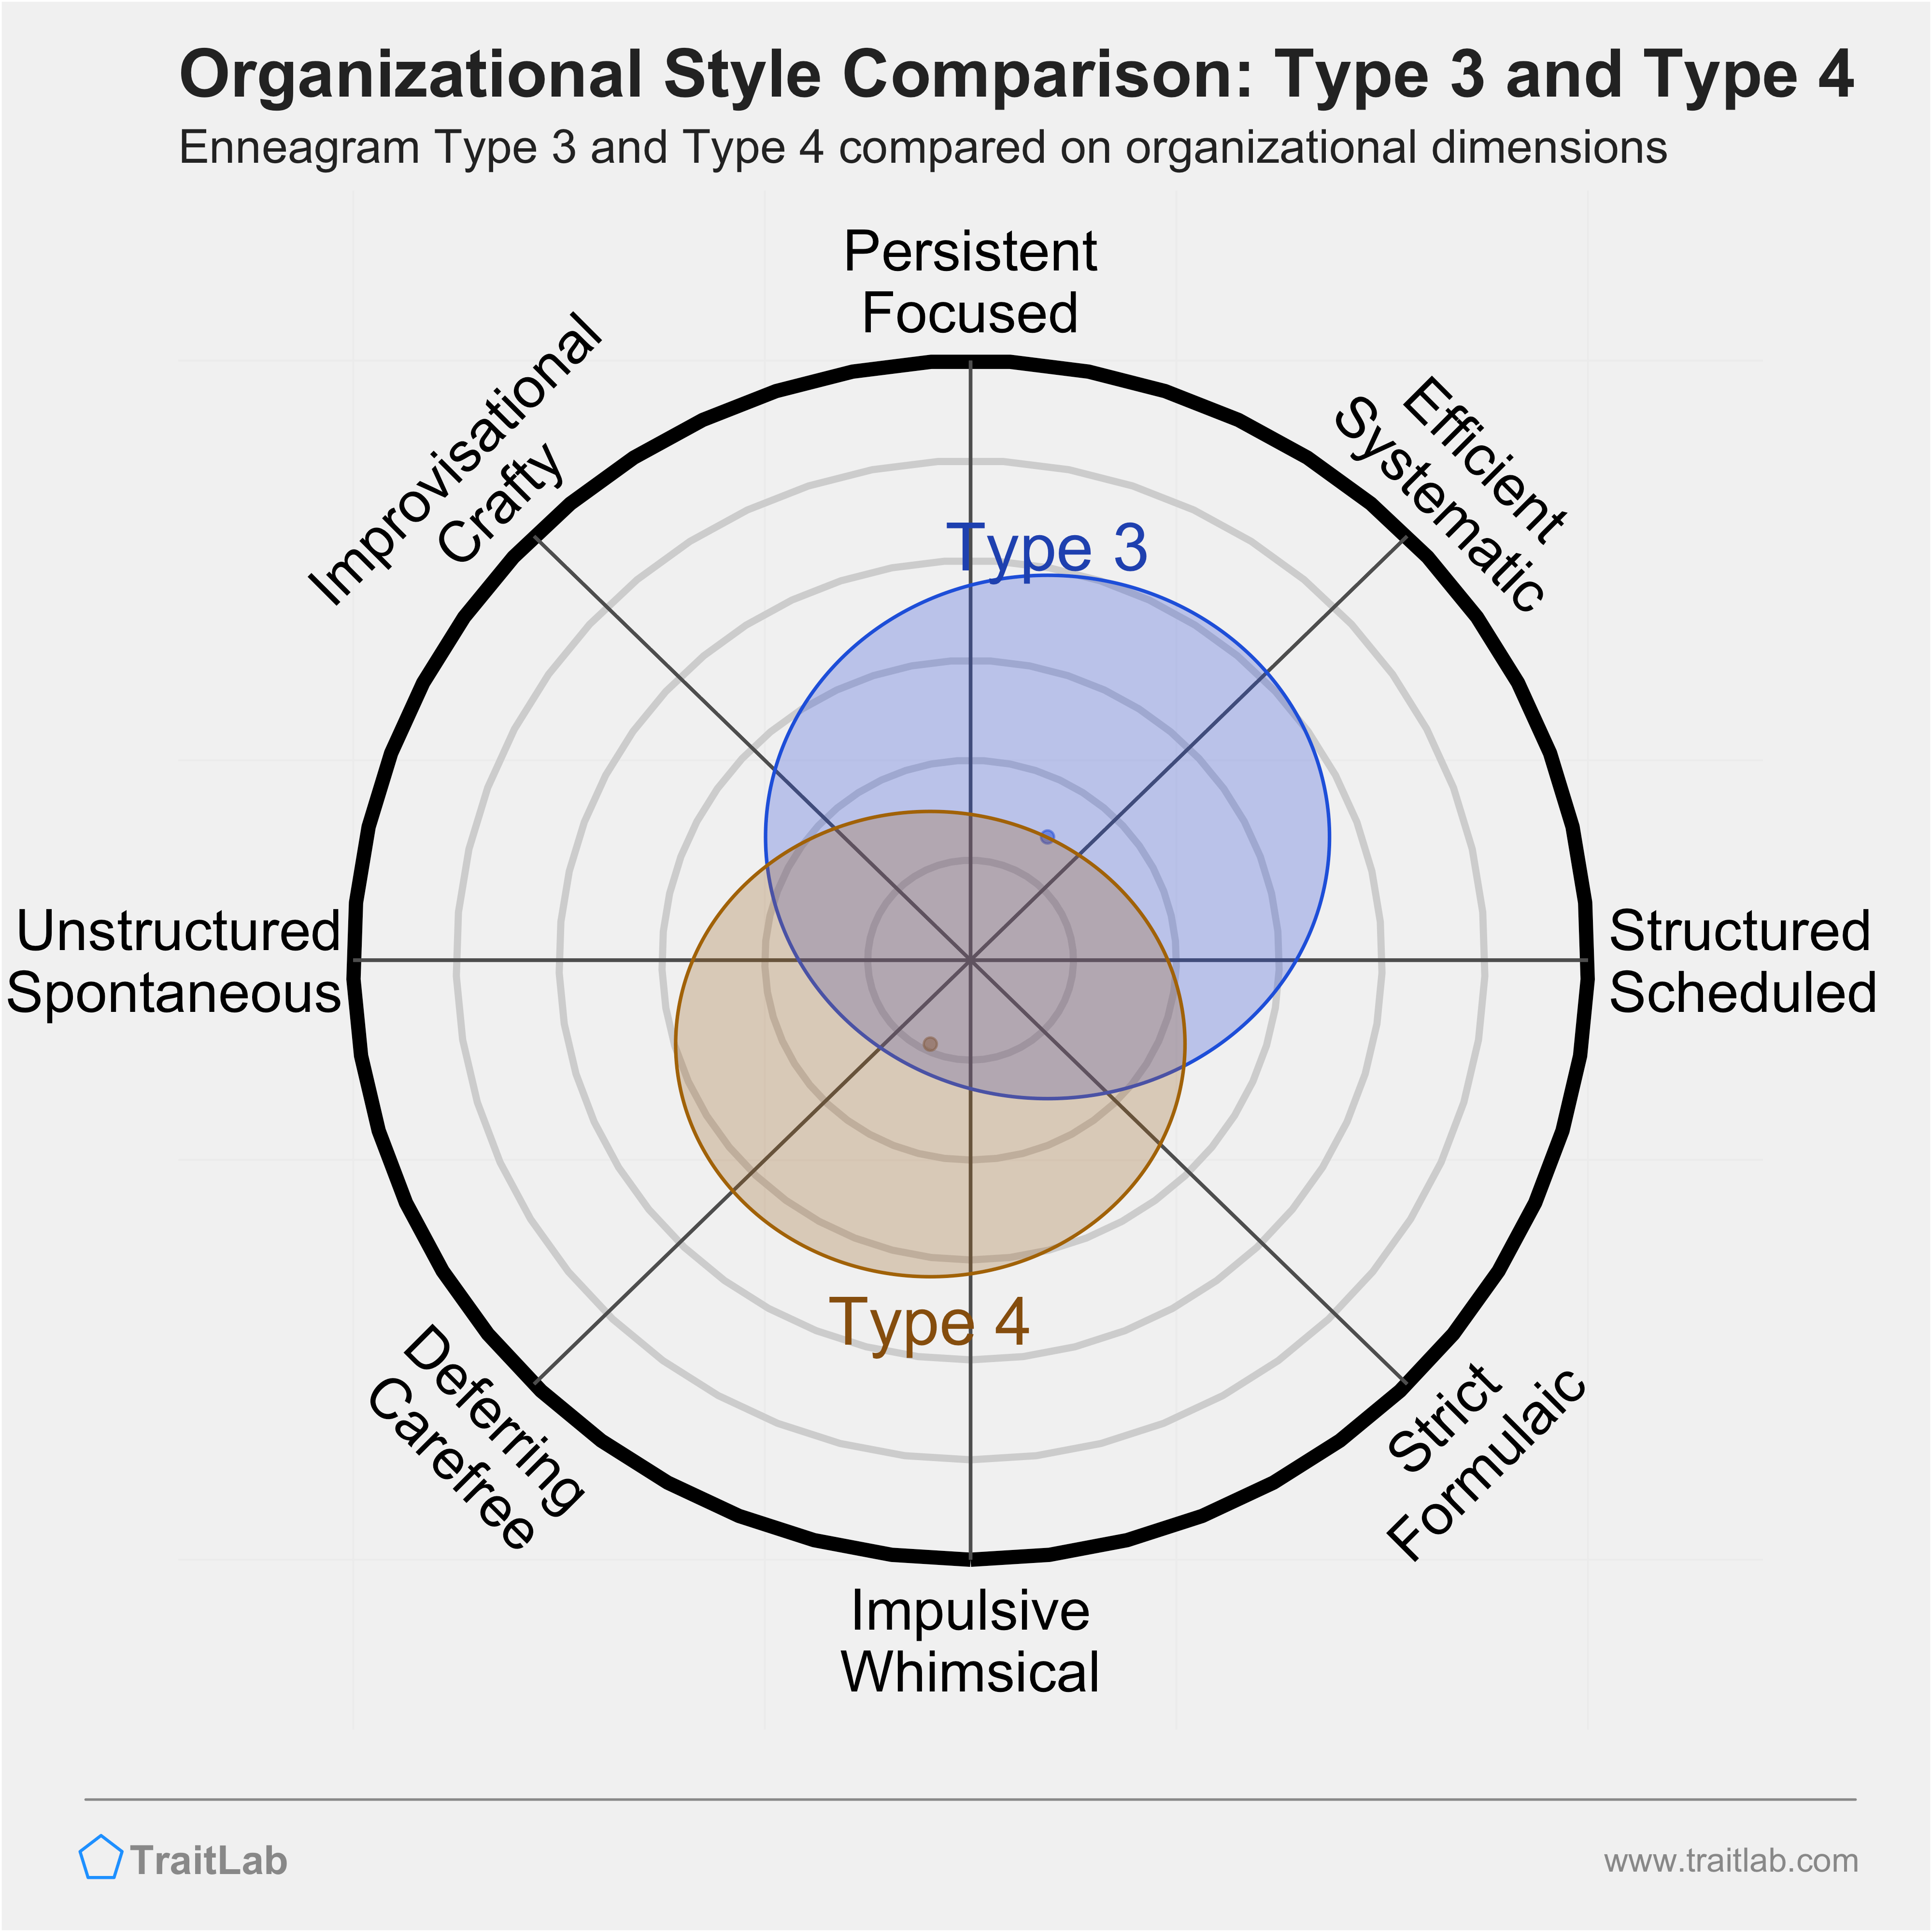 Type 3 and Type 4 comparison across organizational dimensions